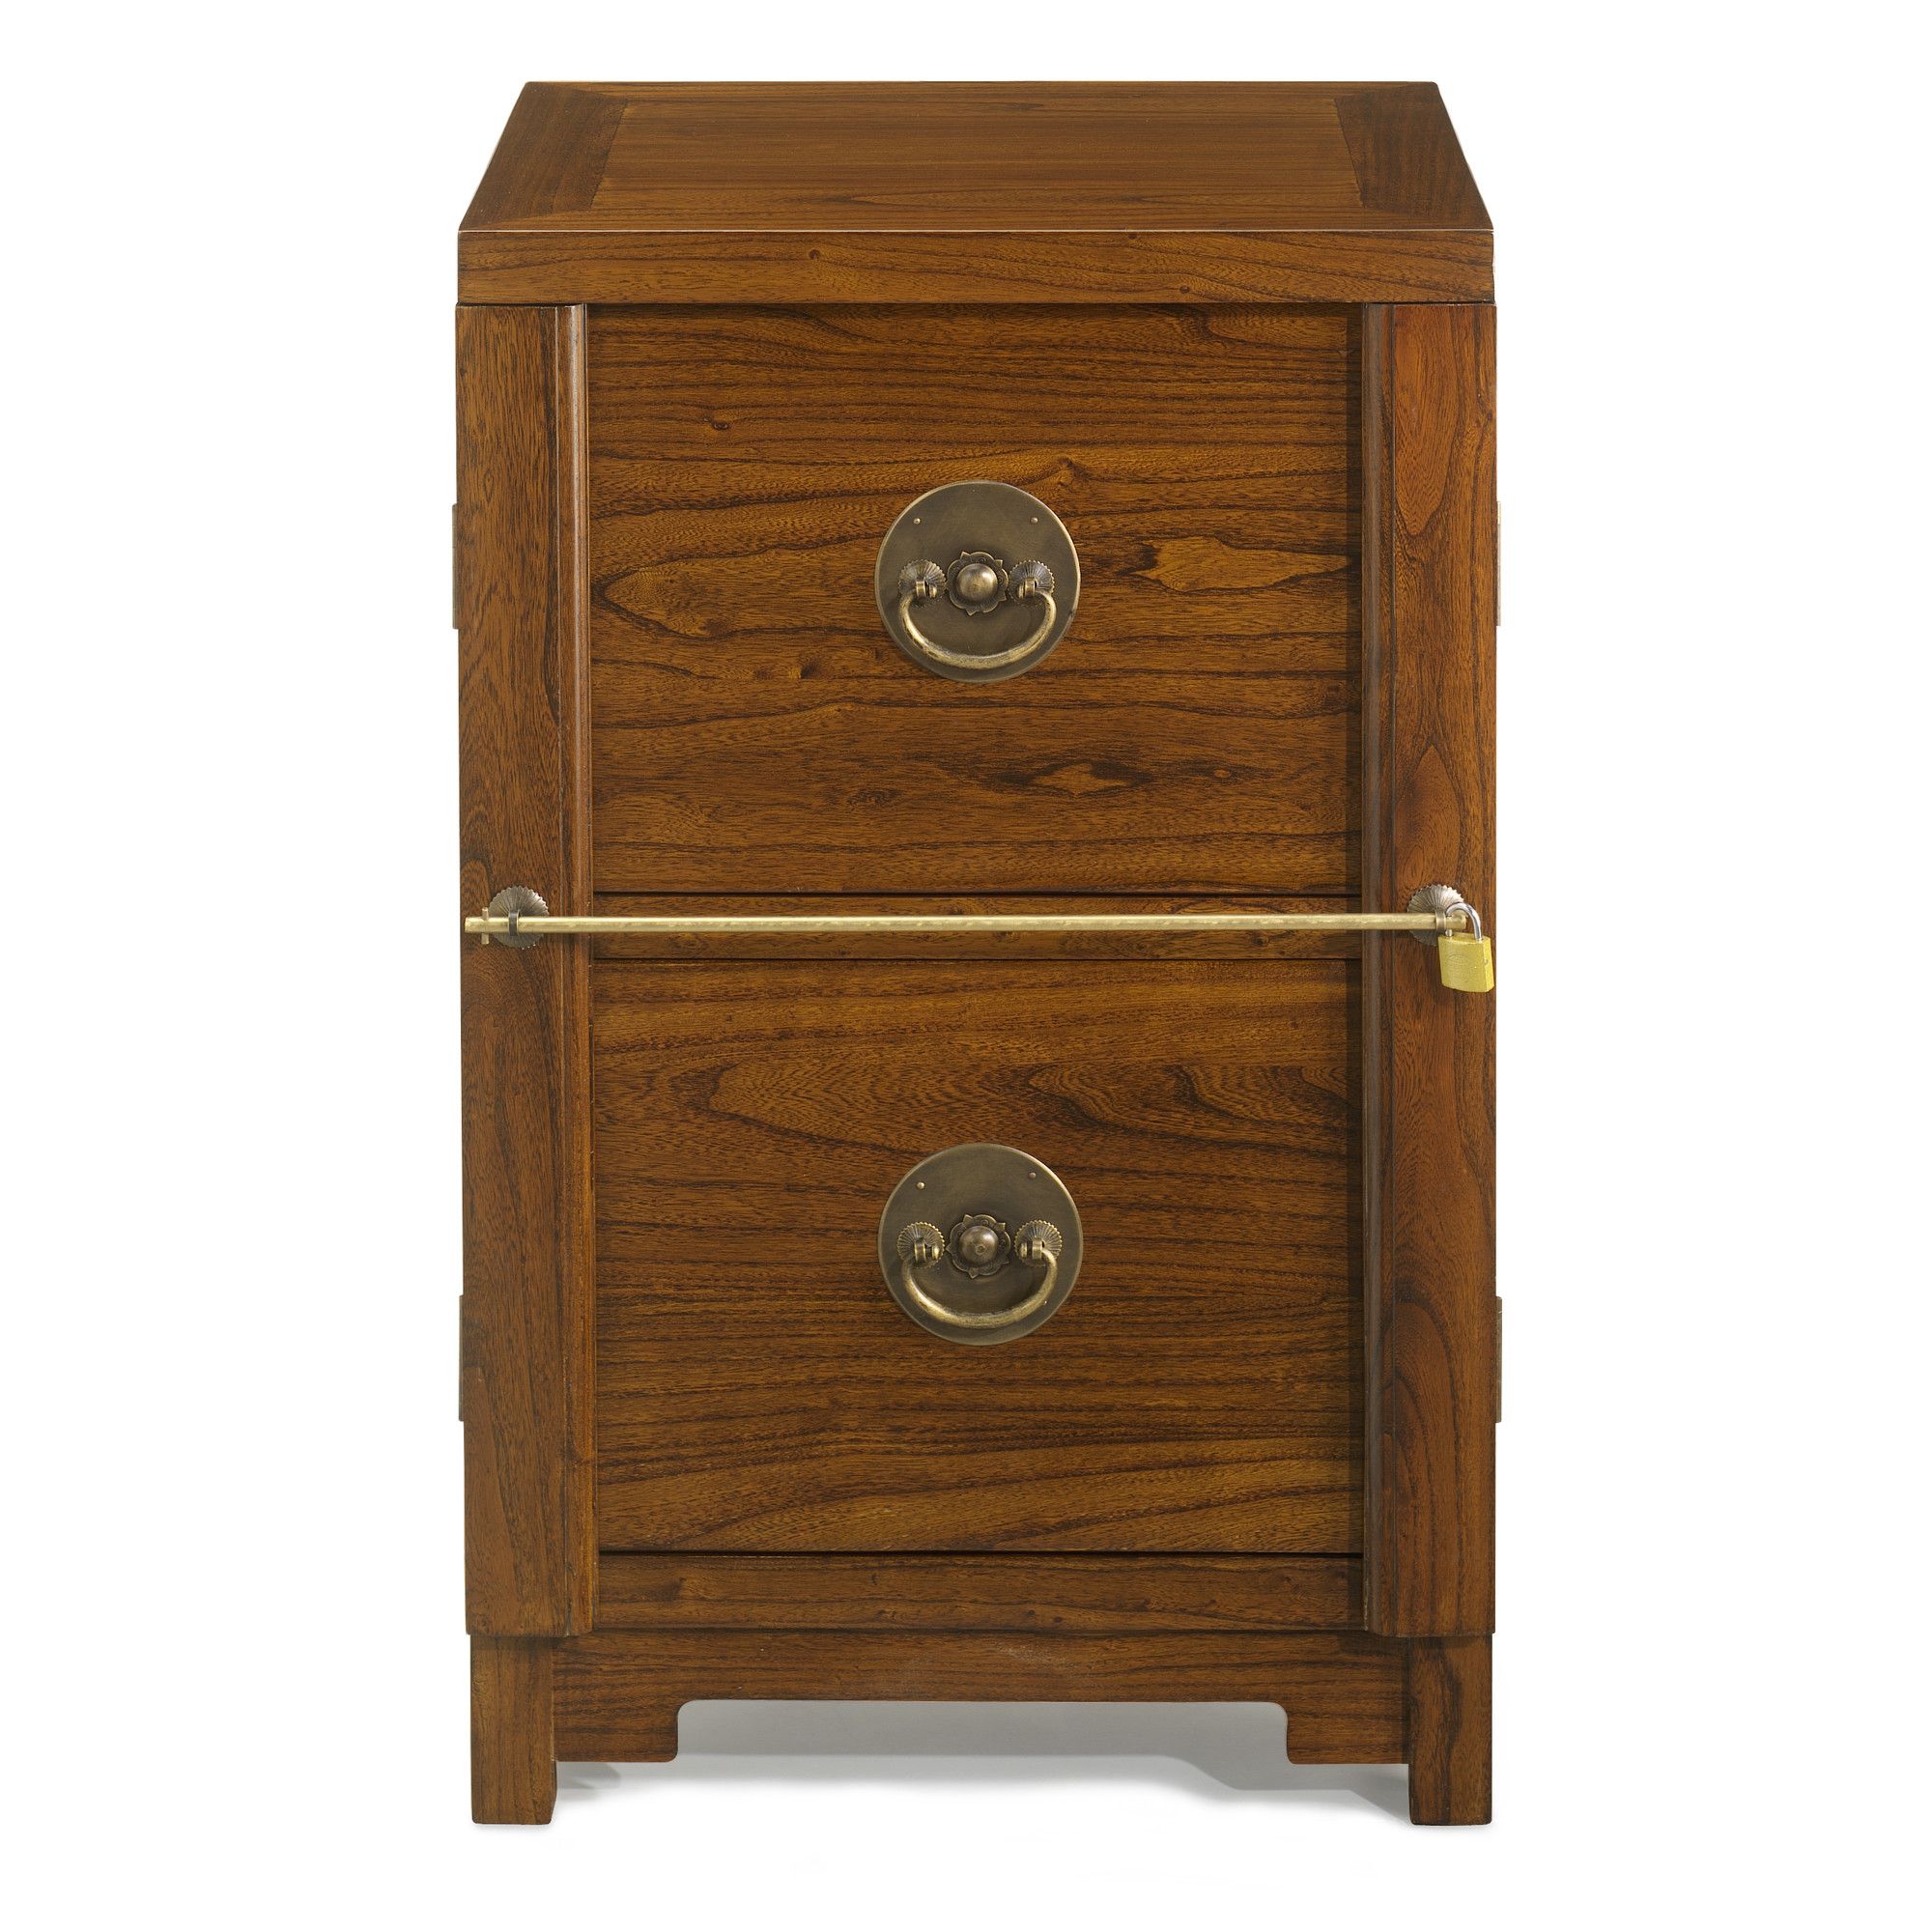 Shimu Chinese Classical Two Drawer Filing Cabinet - Warm Elm at Tesco Direct